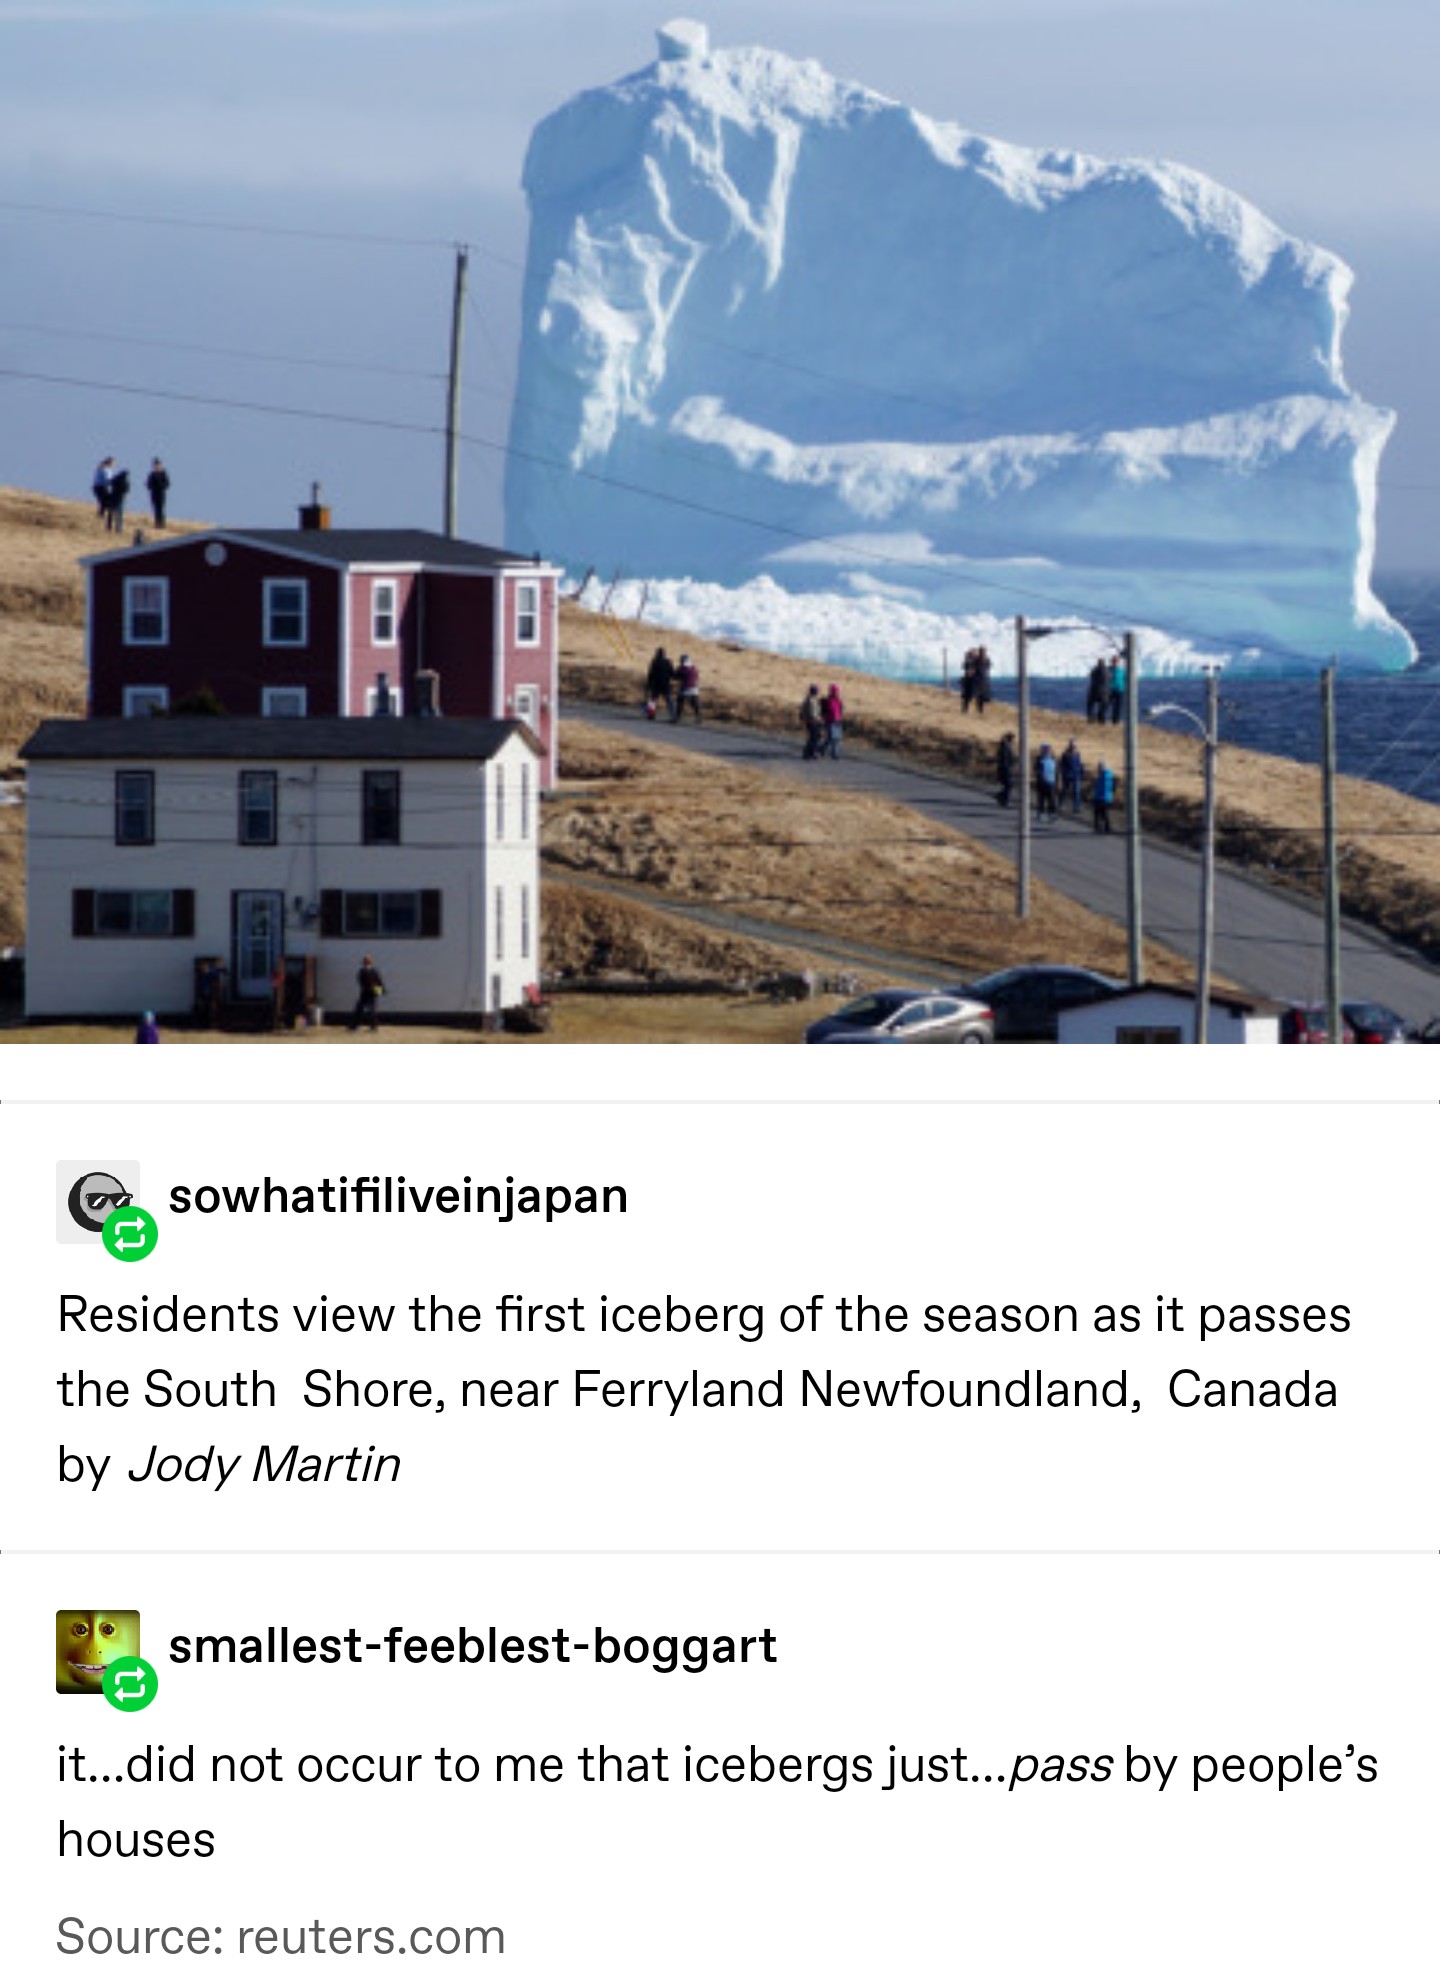 newfoundland iceberg - en sowhatifiliveinjapan Residents view the first iceberg of the season as it passes the South Shore, near Ferryland Newfoundland, Canada by Jody Martin smallestfeeblestboggart it...did not occur to me that icebergs just...pass by pe